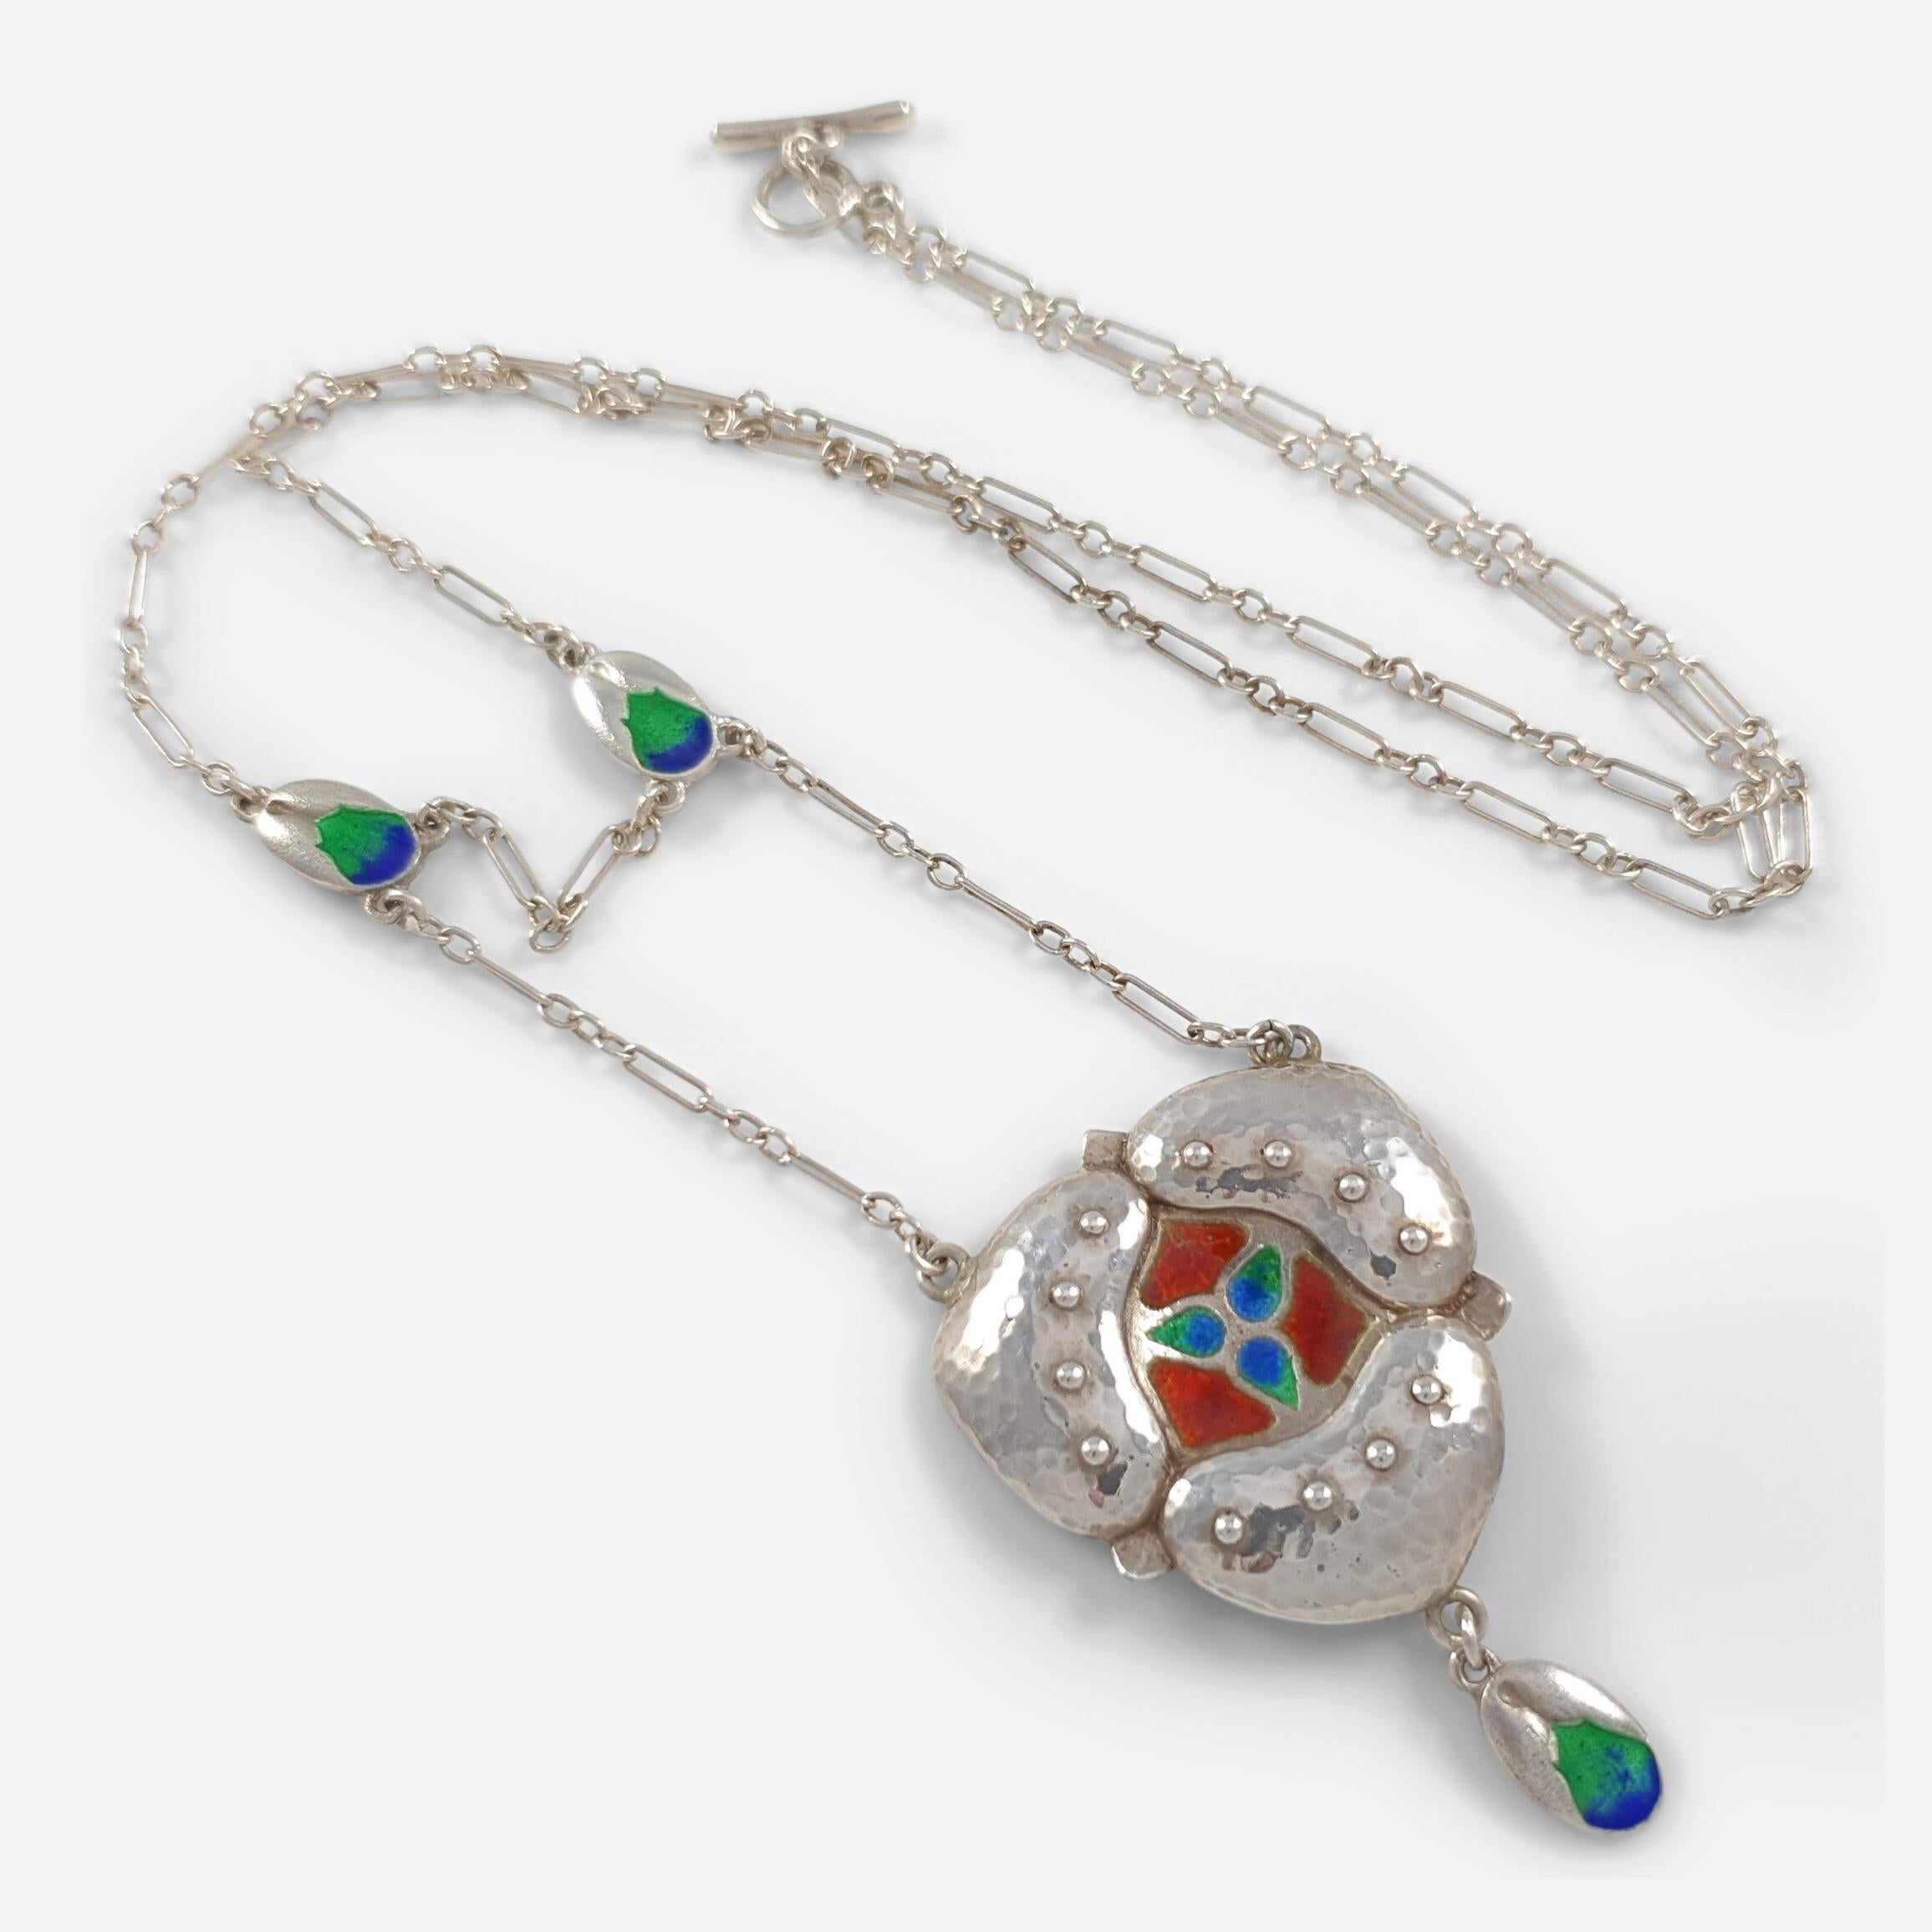 Arts and Crafts Murrle Bennett & Co. Arts & Crafts Silver and Enamel Pendant Necklace circa 1905